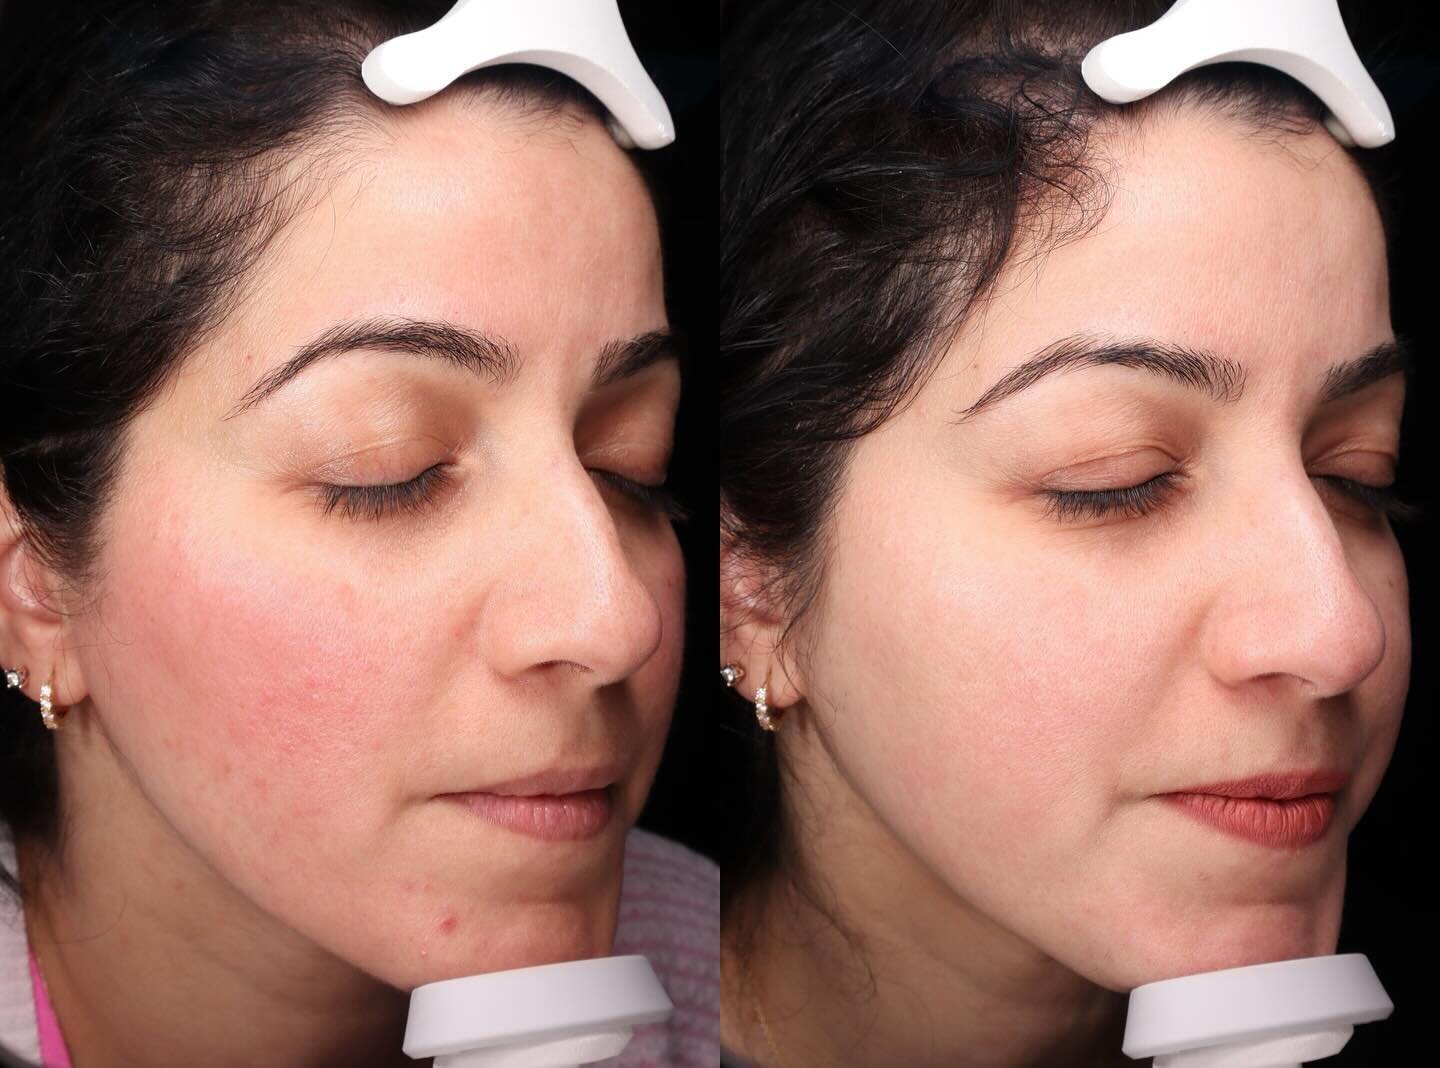 Learning how to properly manage your Rosacea can be LIFE changing! There are many options when it comes to managing this skin condition, it can be overwhelming at times. Don&rsquo;t fret, that&rsquo;s what I&rsquo;m here for! 😜

This client came in 